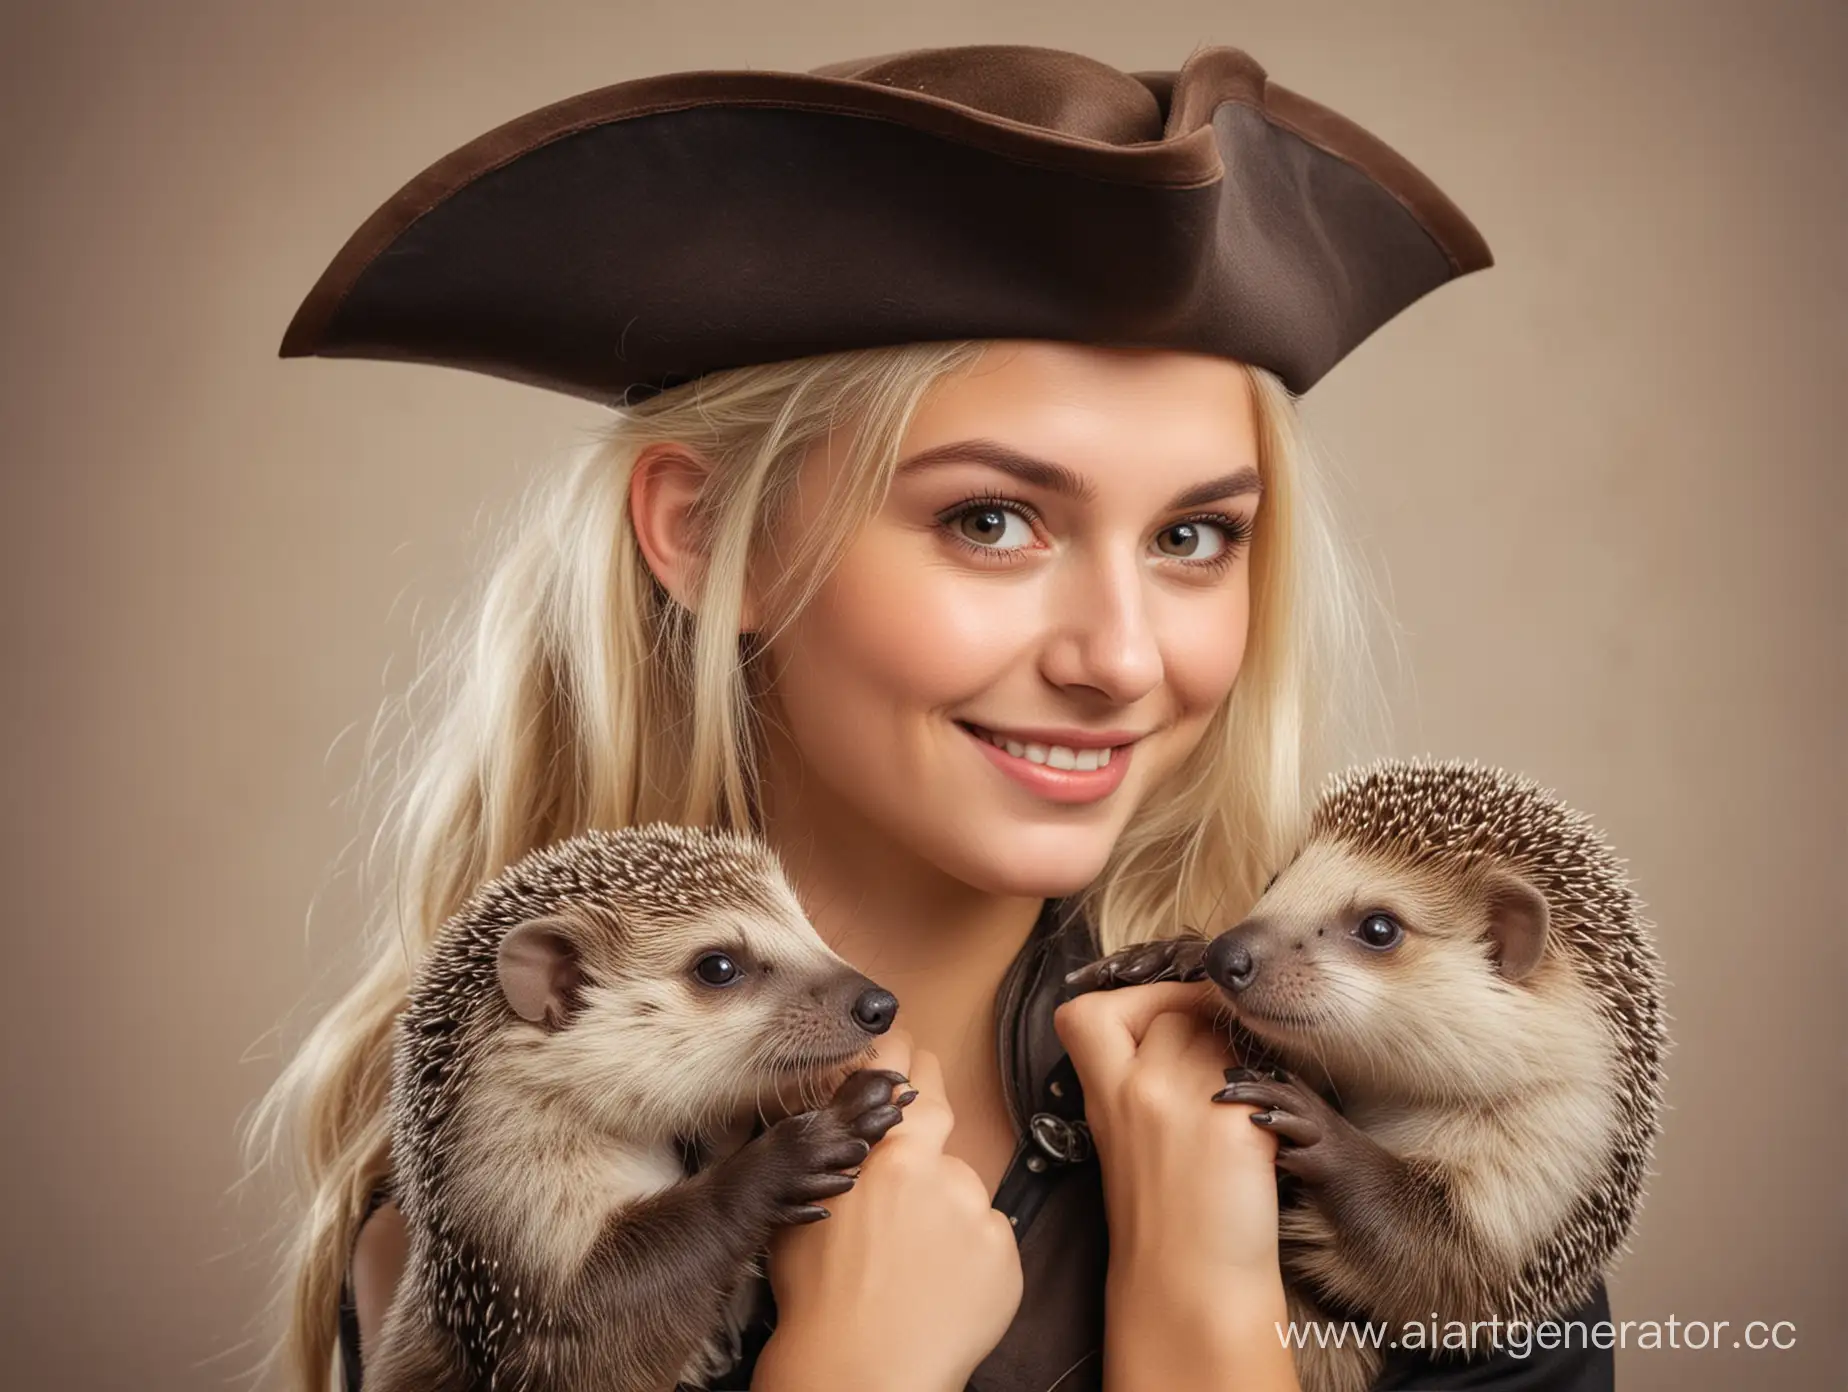 Adorable-Blonde-Girl-Holding-Cute-Otter-with-Pirate-Hedgehog